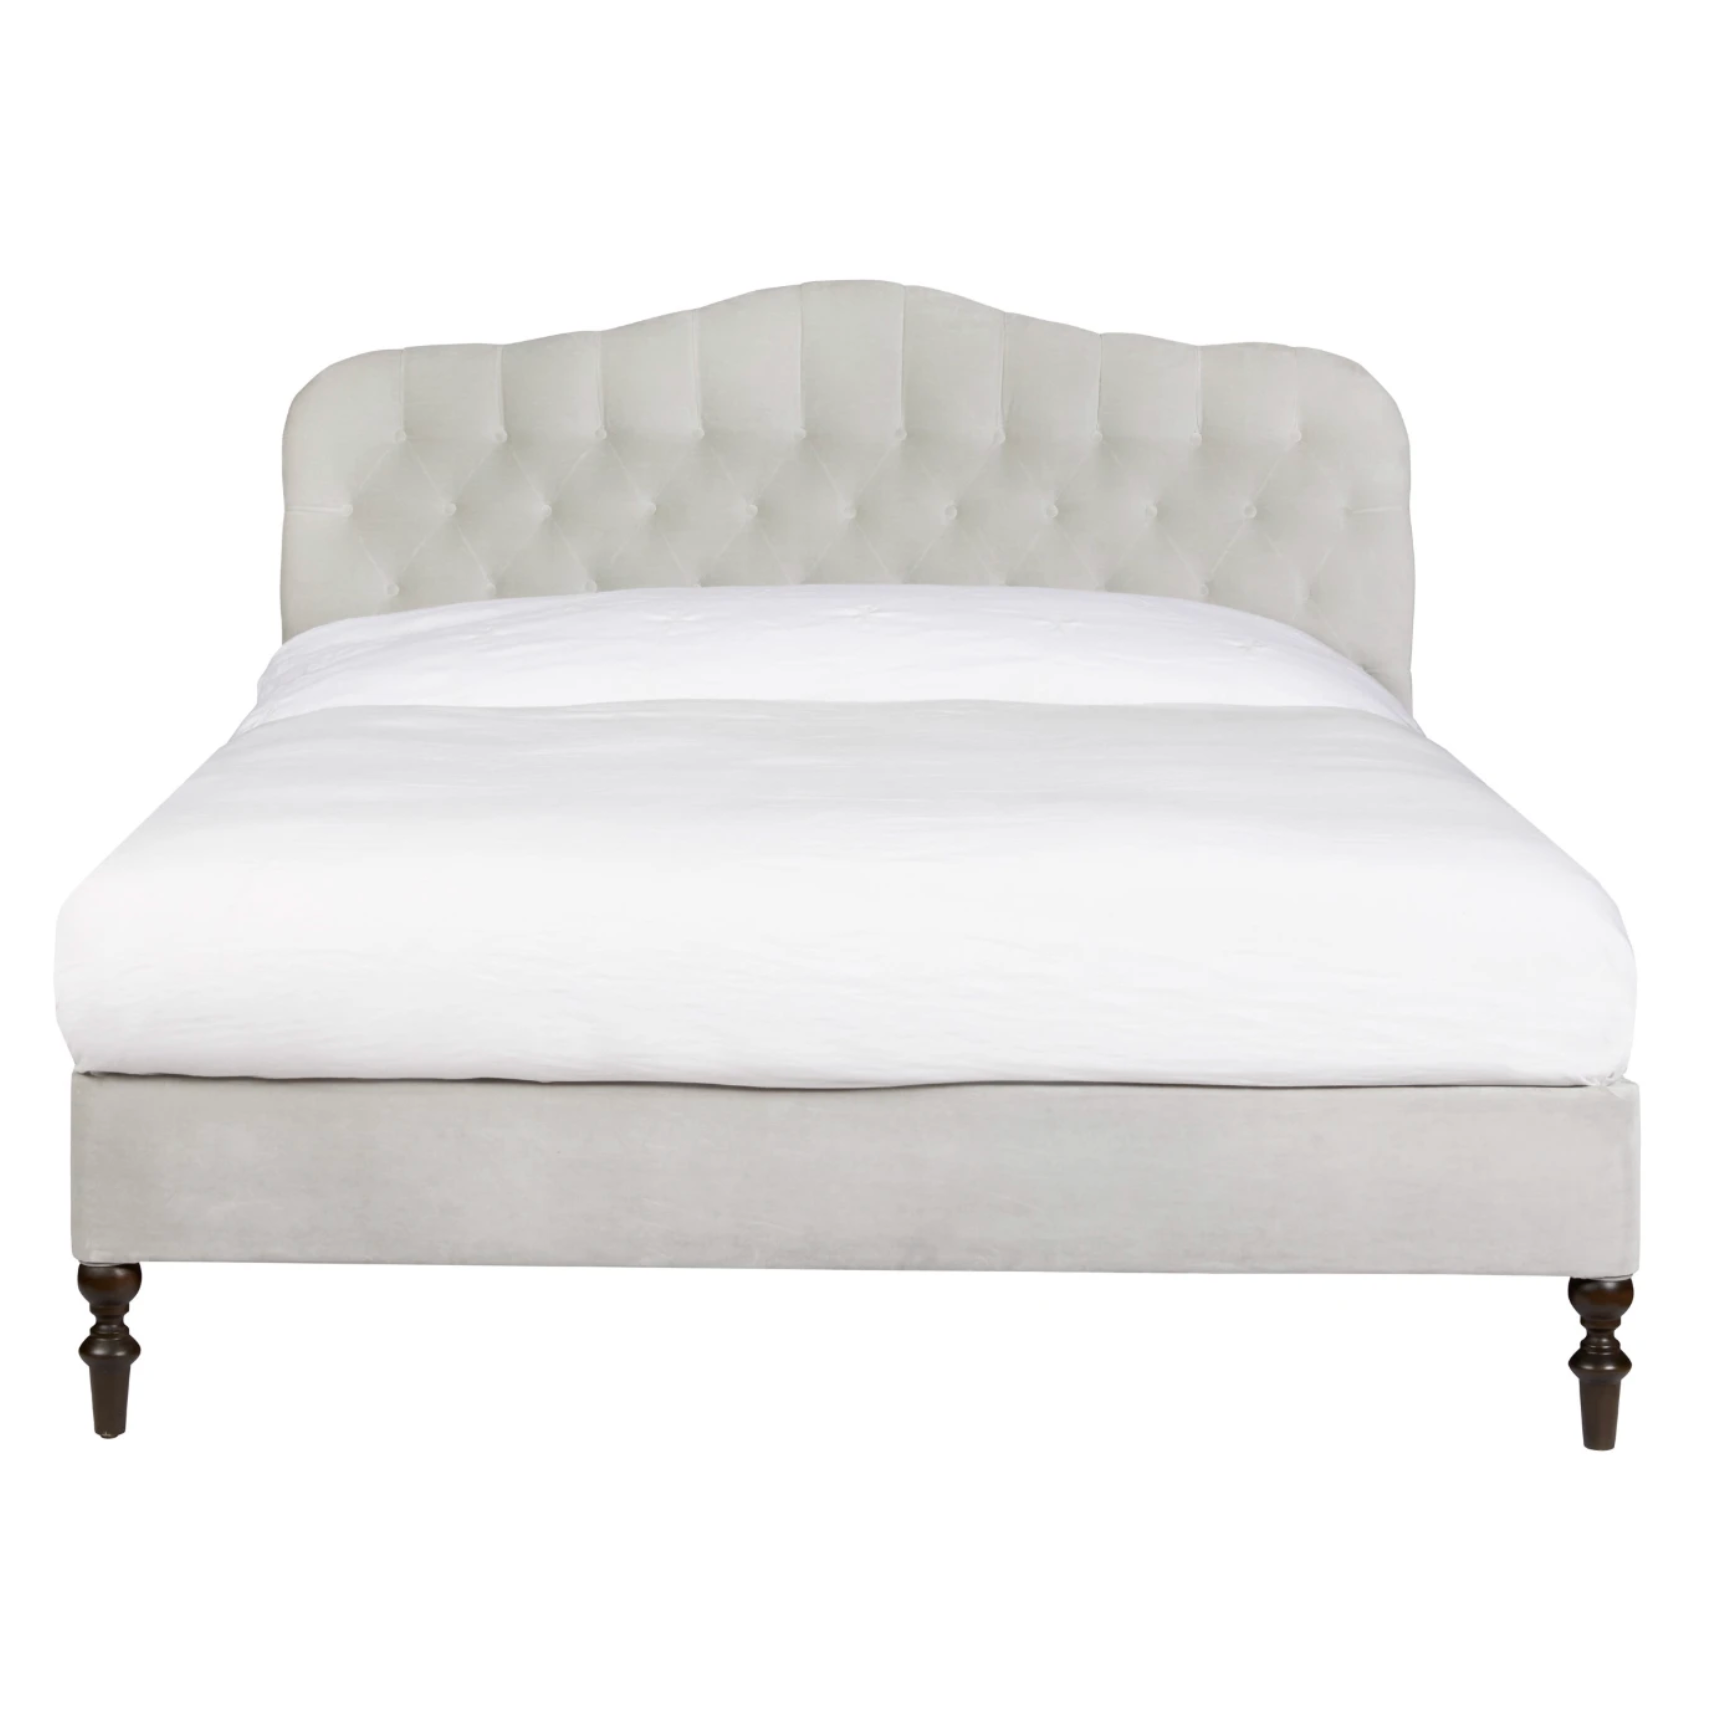 Heavy on the elegance with an east-coast vibe! This camelback, button-tufted bed in a light textural grey also features turned legs and upholstered side rails for added interest. 